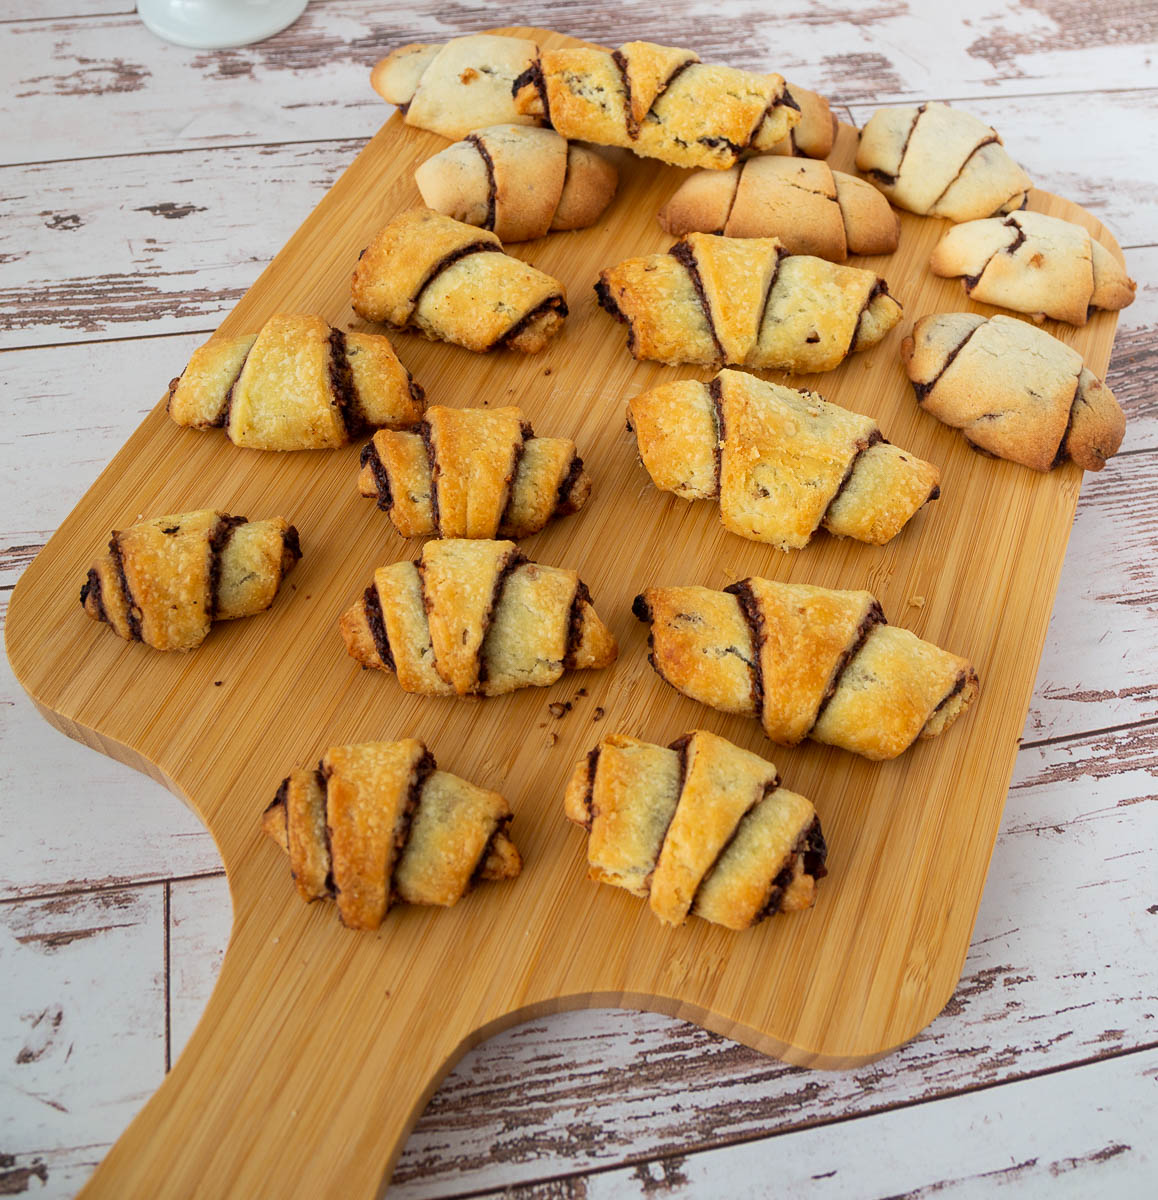 Chocolate rugelach on a wooden tray.